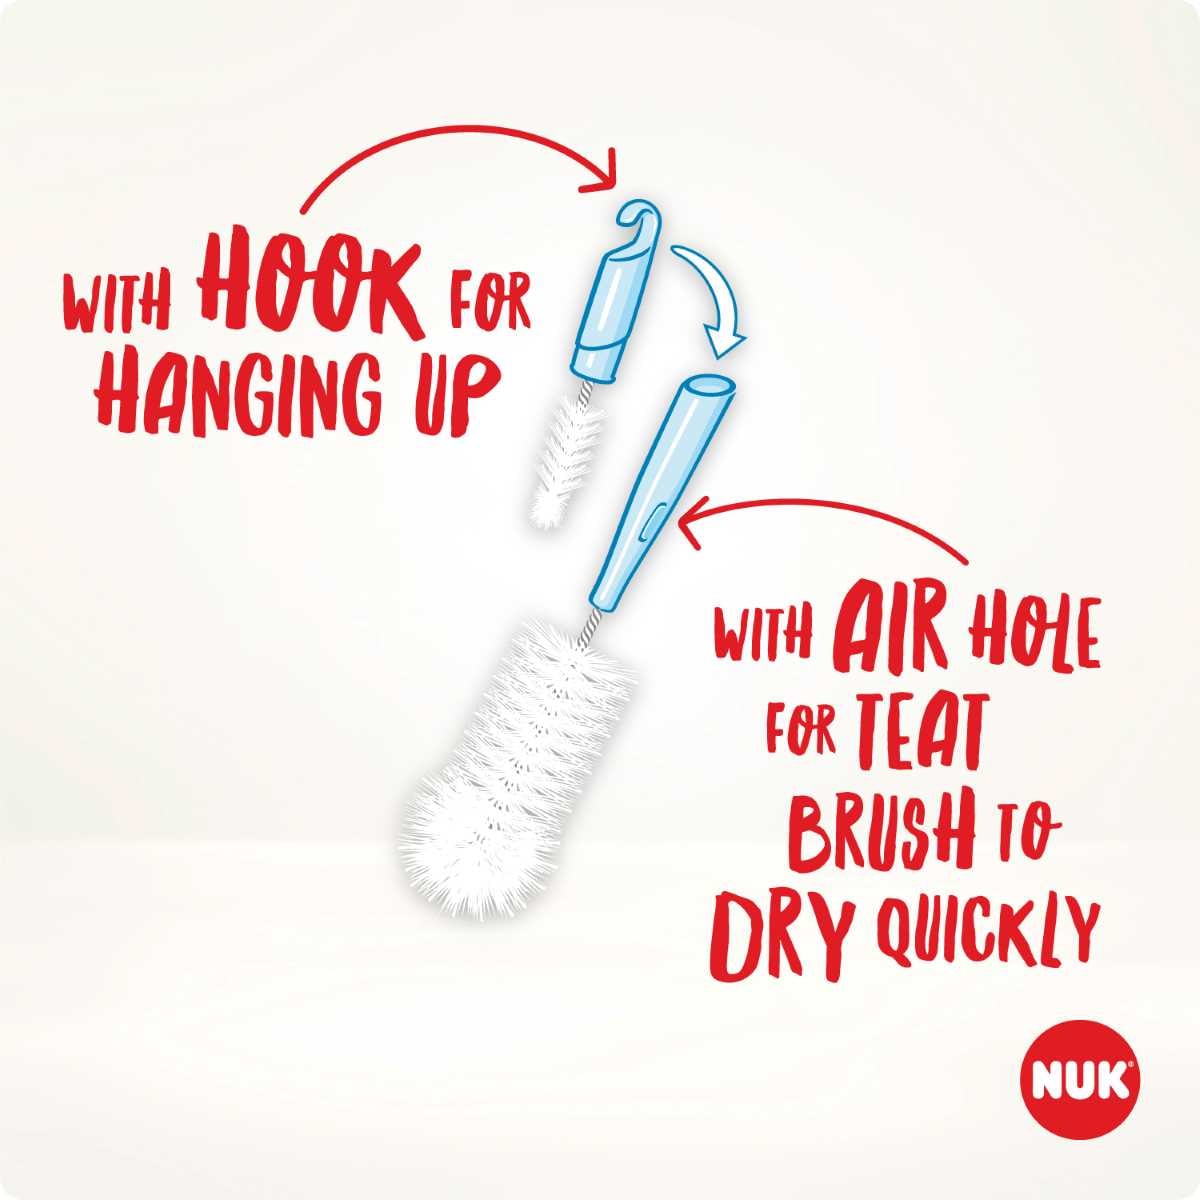 NUK 2-in-1 Flexible Bottle and Teat Cleaning Brush